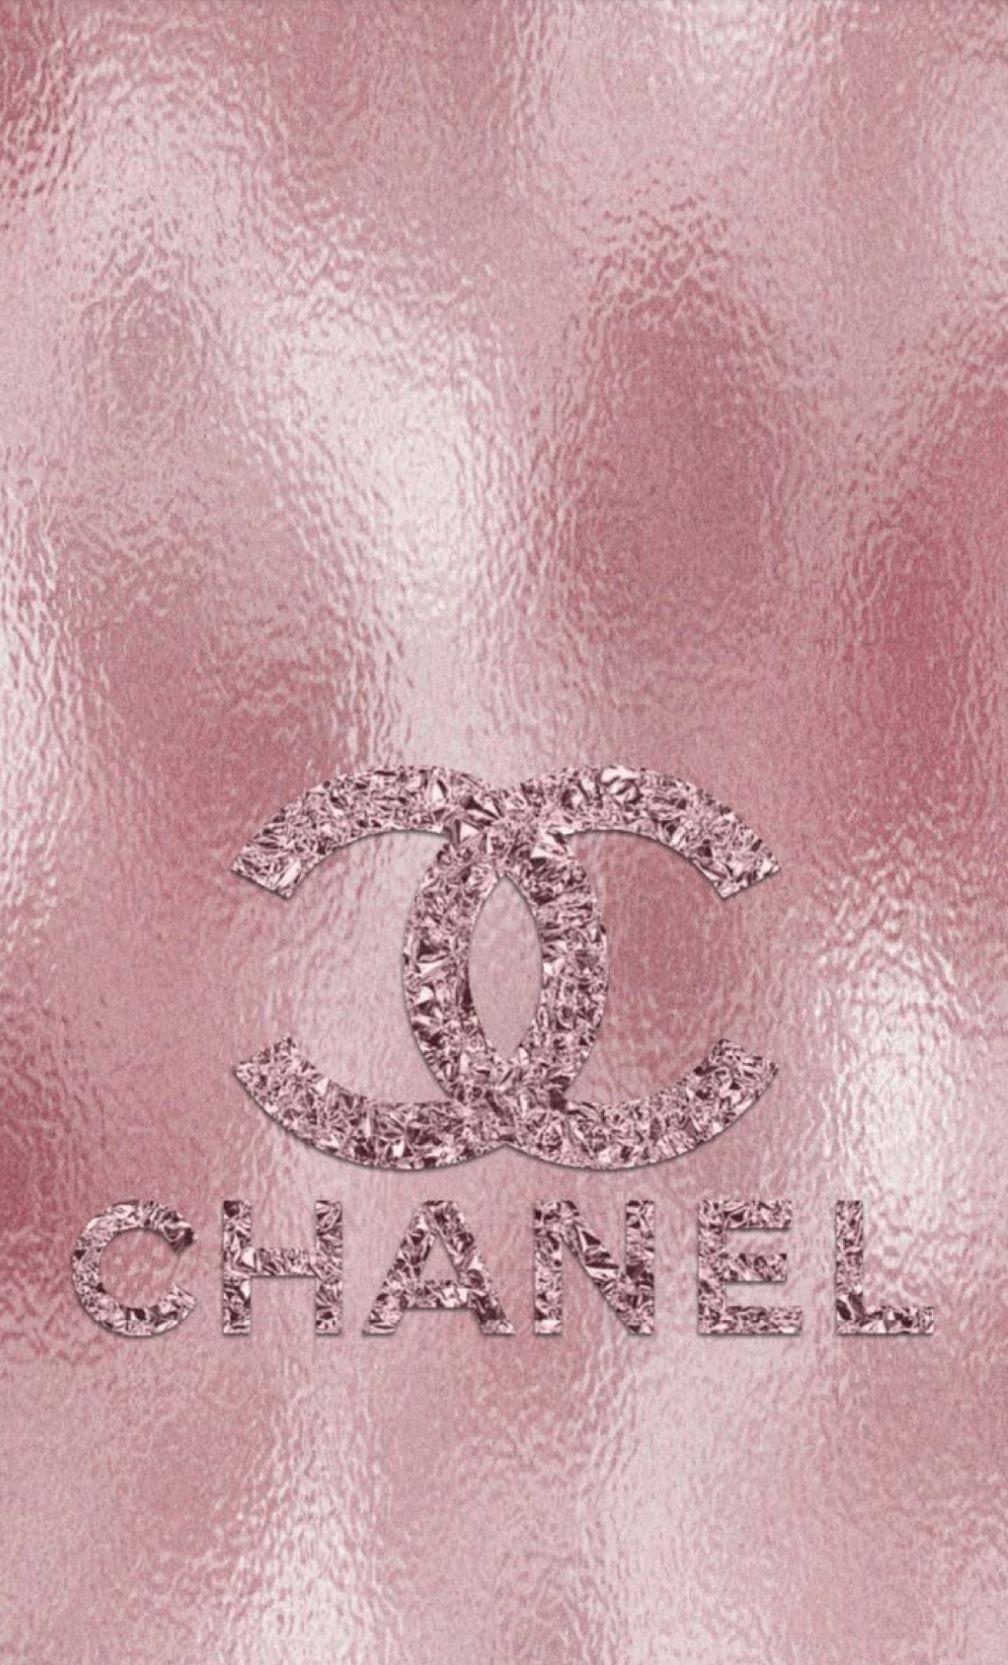 Chanel wallpaper iPhone deluxe  Iphone wallpaper pattern Chanel  wallpapers Flowers photography wallpaper